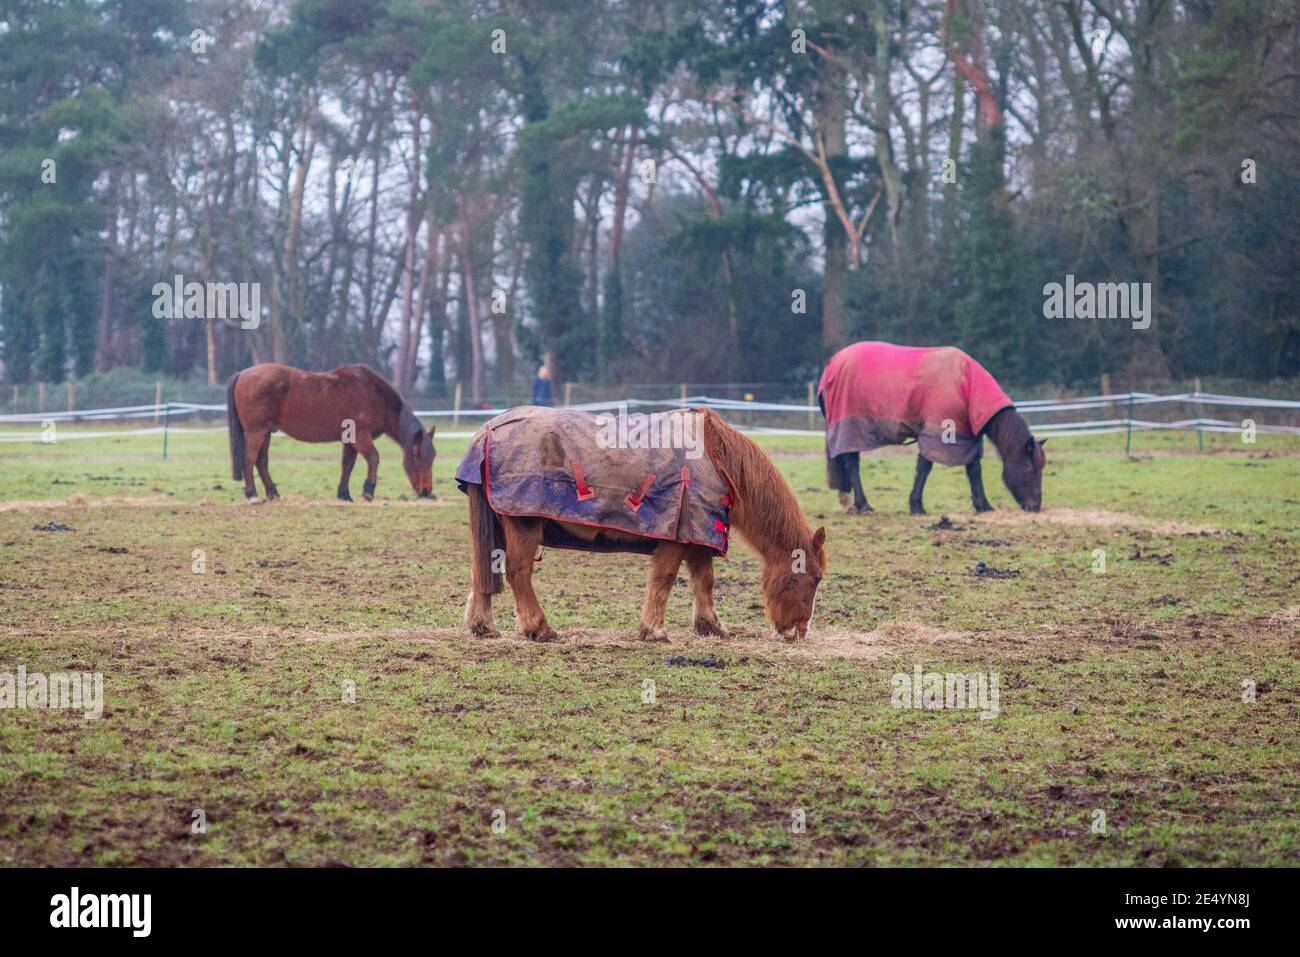 Three horses grazing in a field, two with winter coats Stock Photo